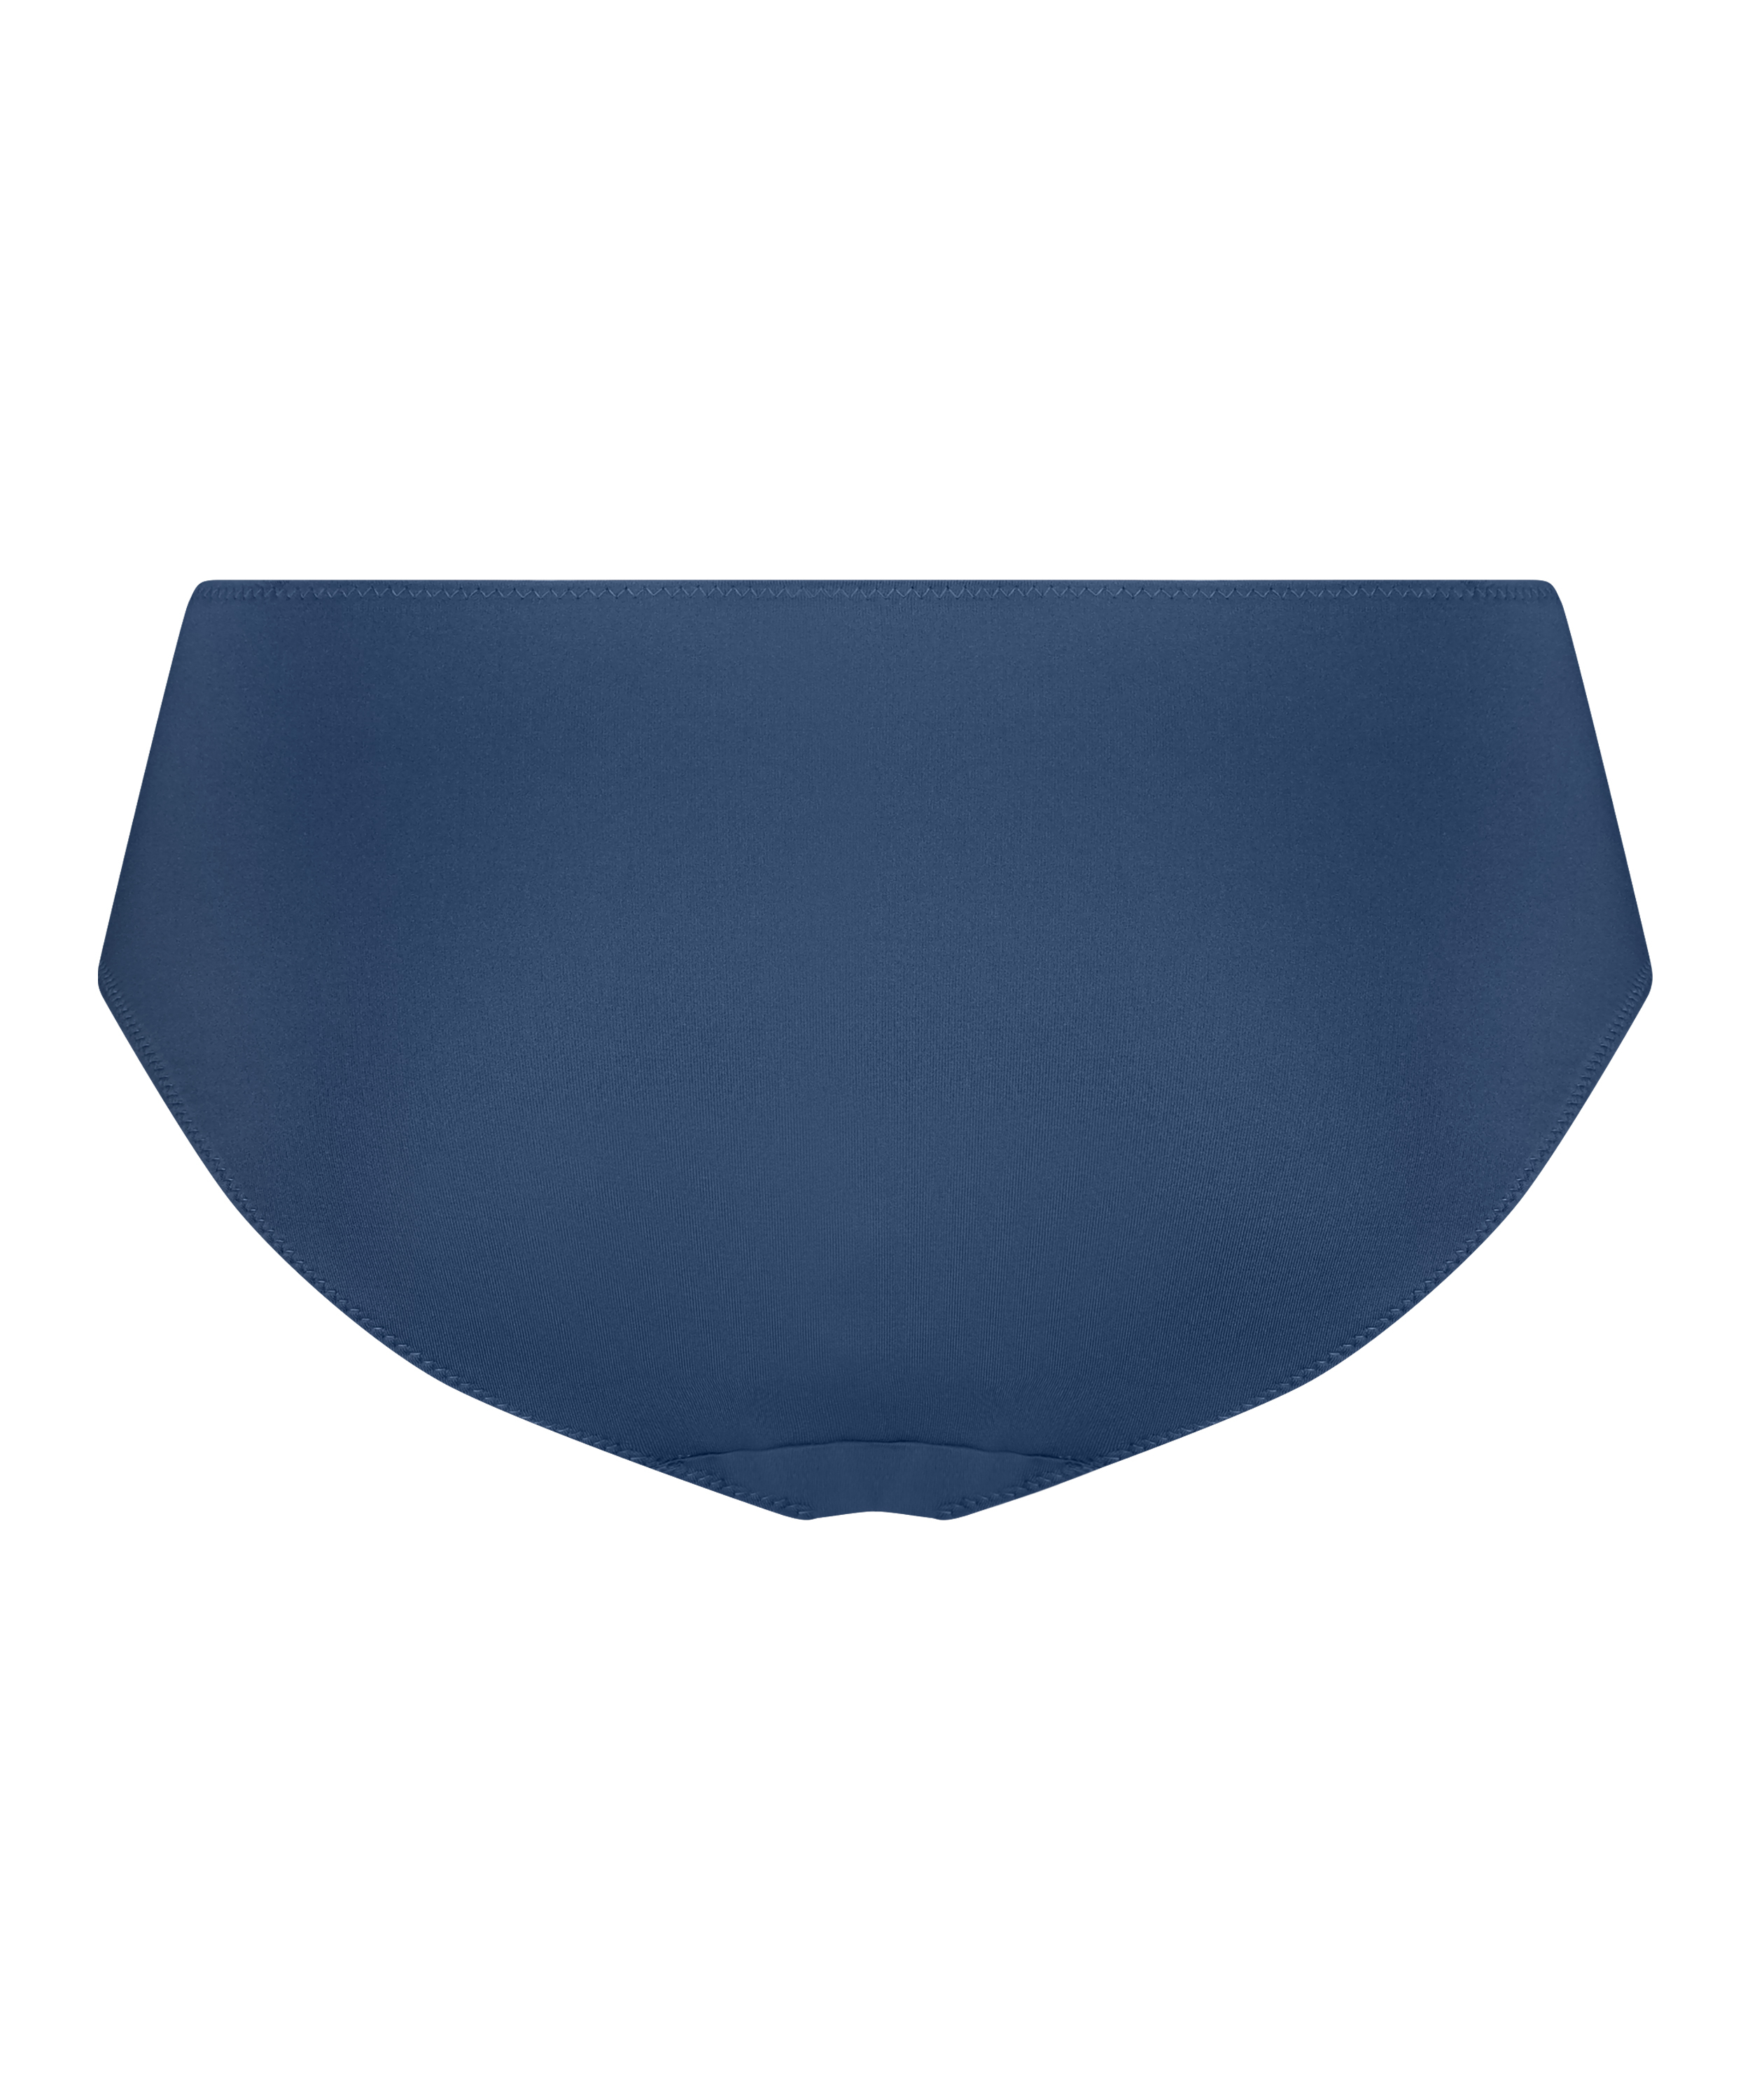 Sophie high knickers, Blue, main